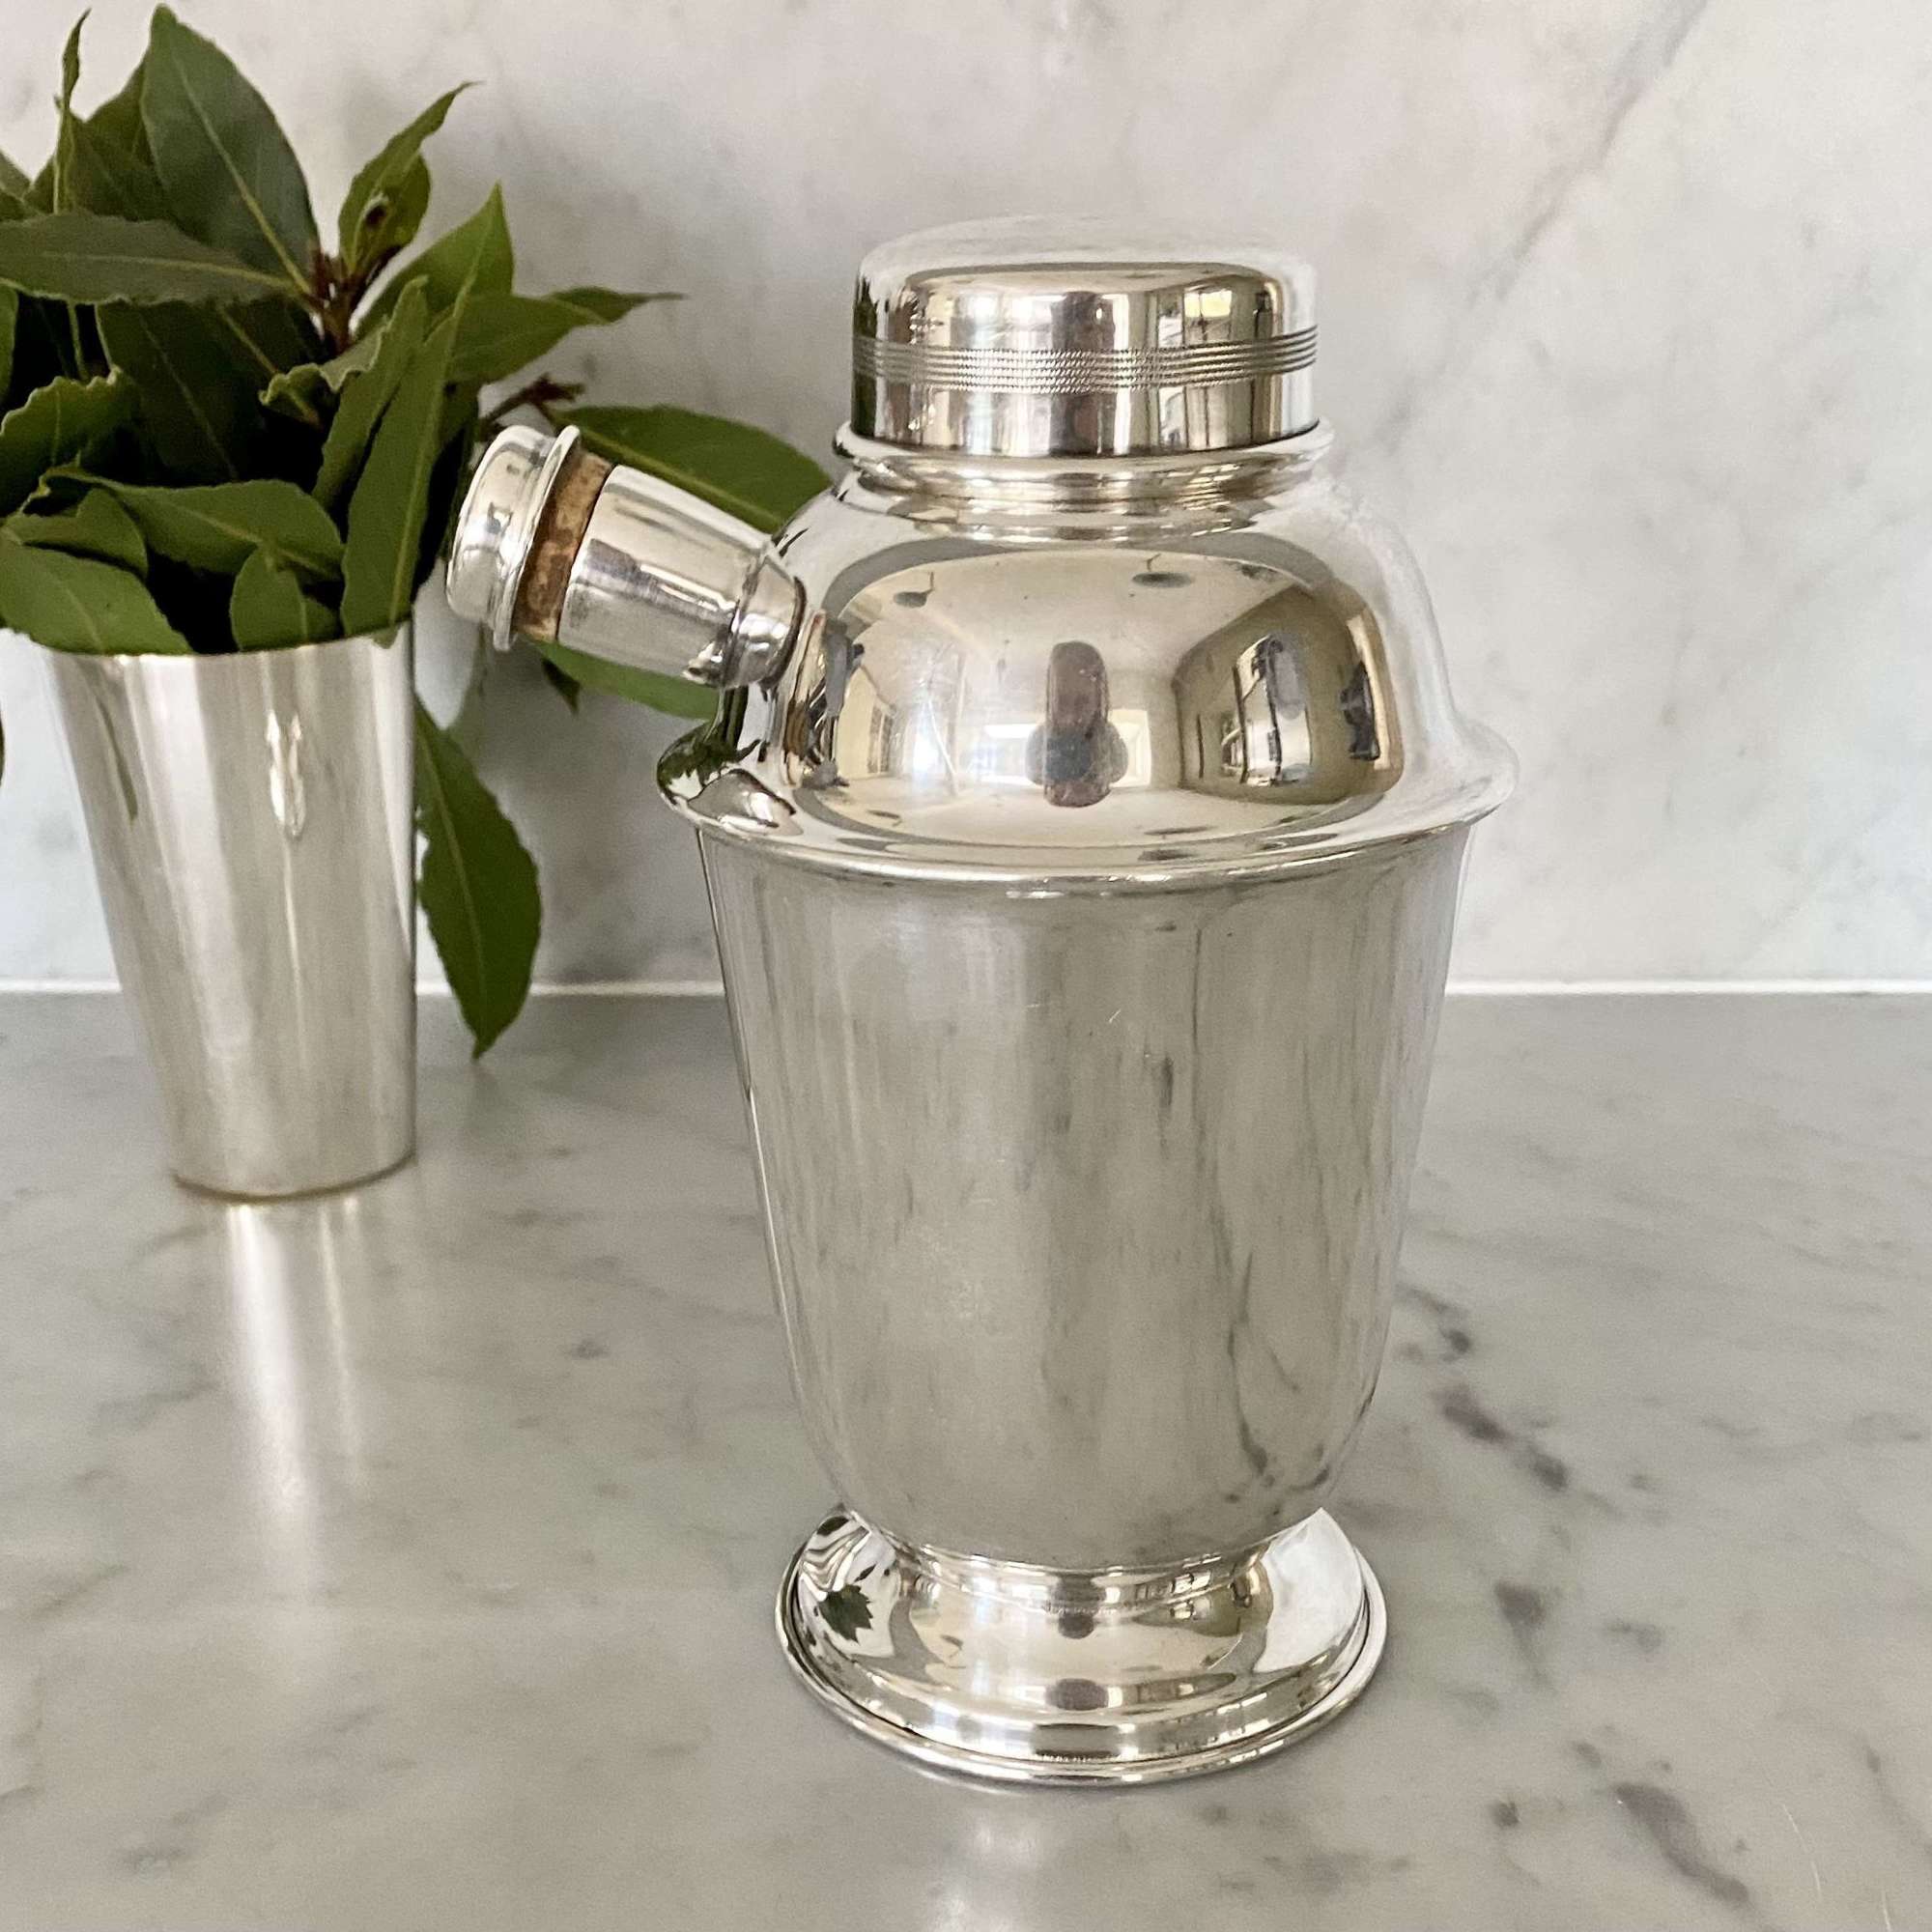 English Art Deco silver plated side spout cocktail shaker